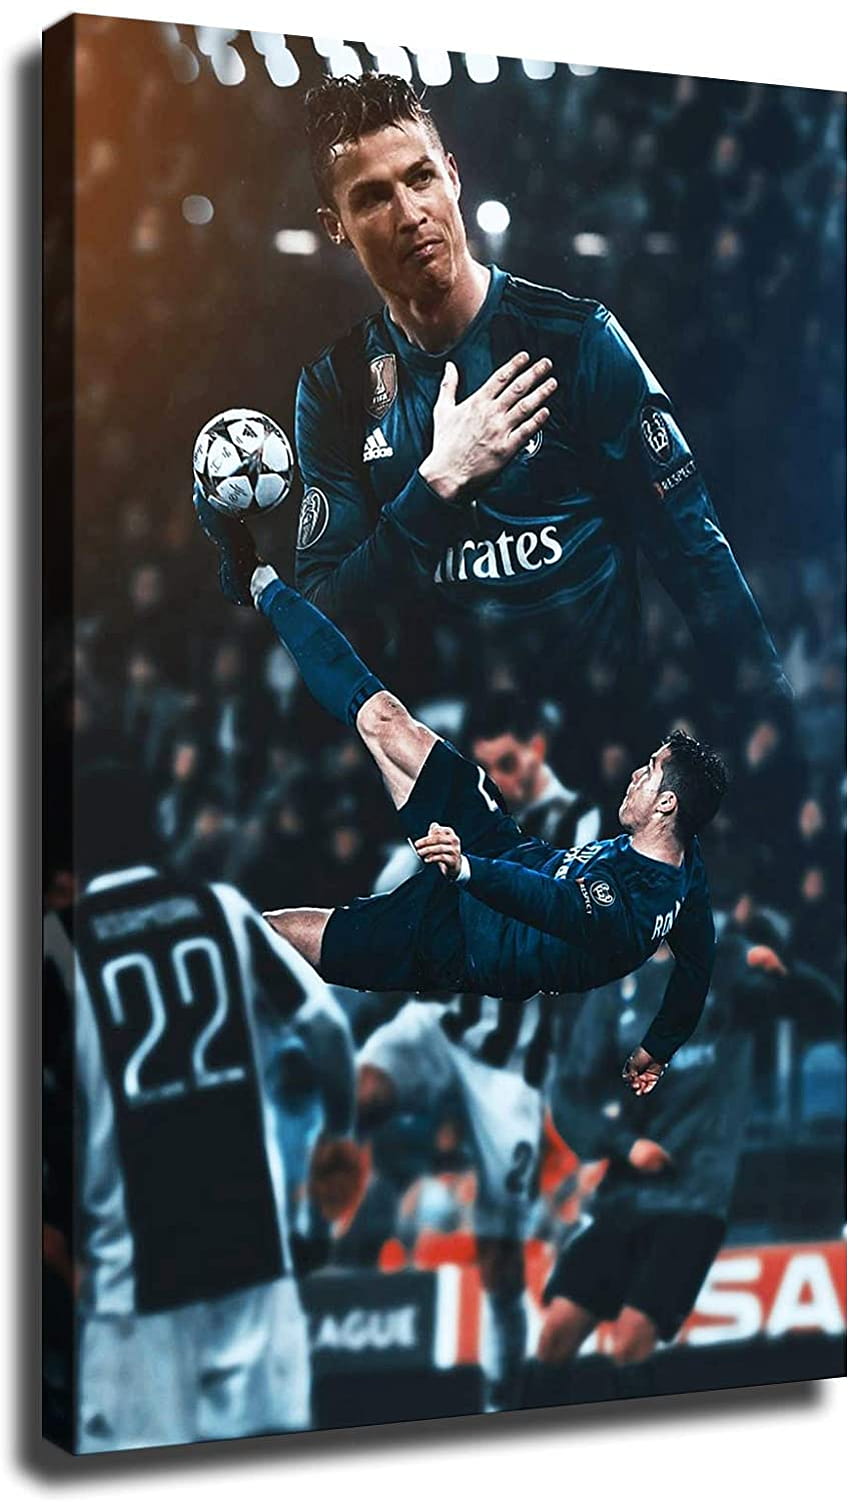 Buy Cristiano Ronaldo poster Football canvas Bedroom living room office indoor aesthetic wall decor art printing 20x30inch,Framed Online in Taiwan. B08TQK7FY8 HD phone wallpaper